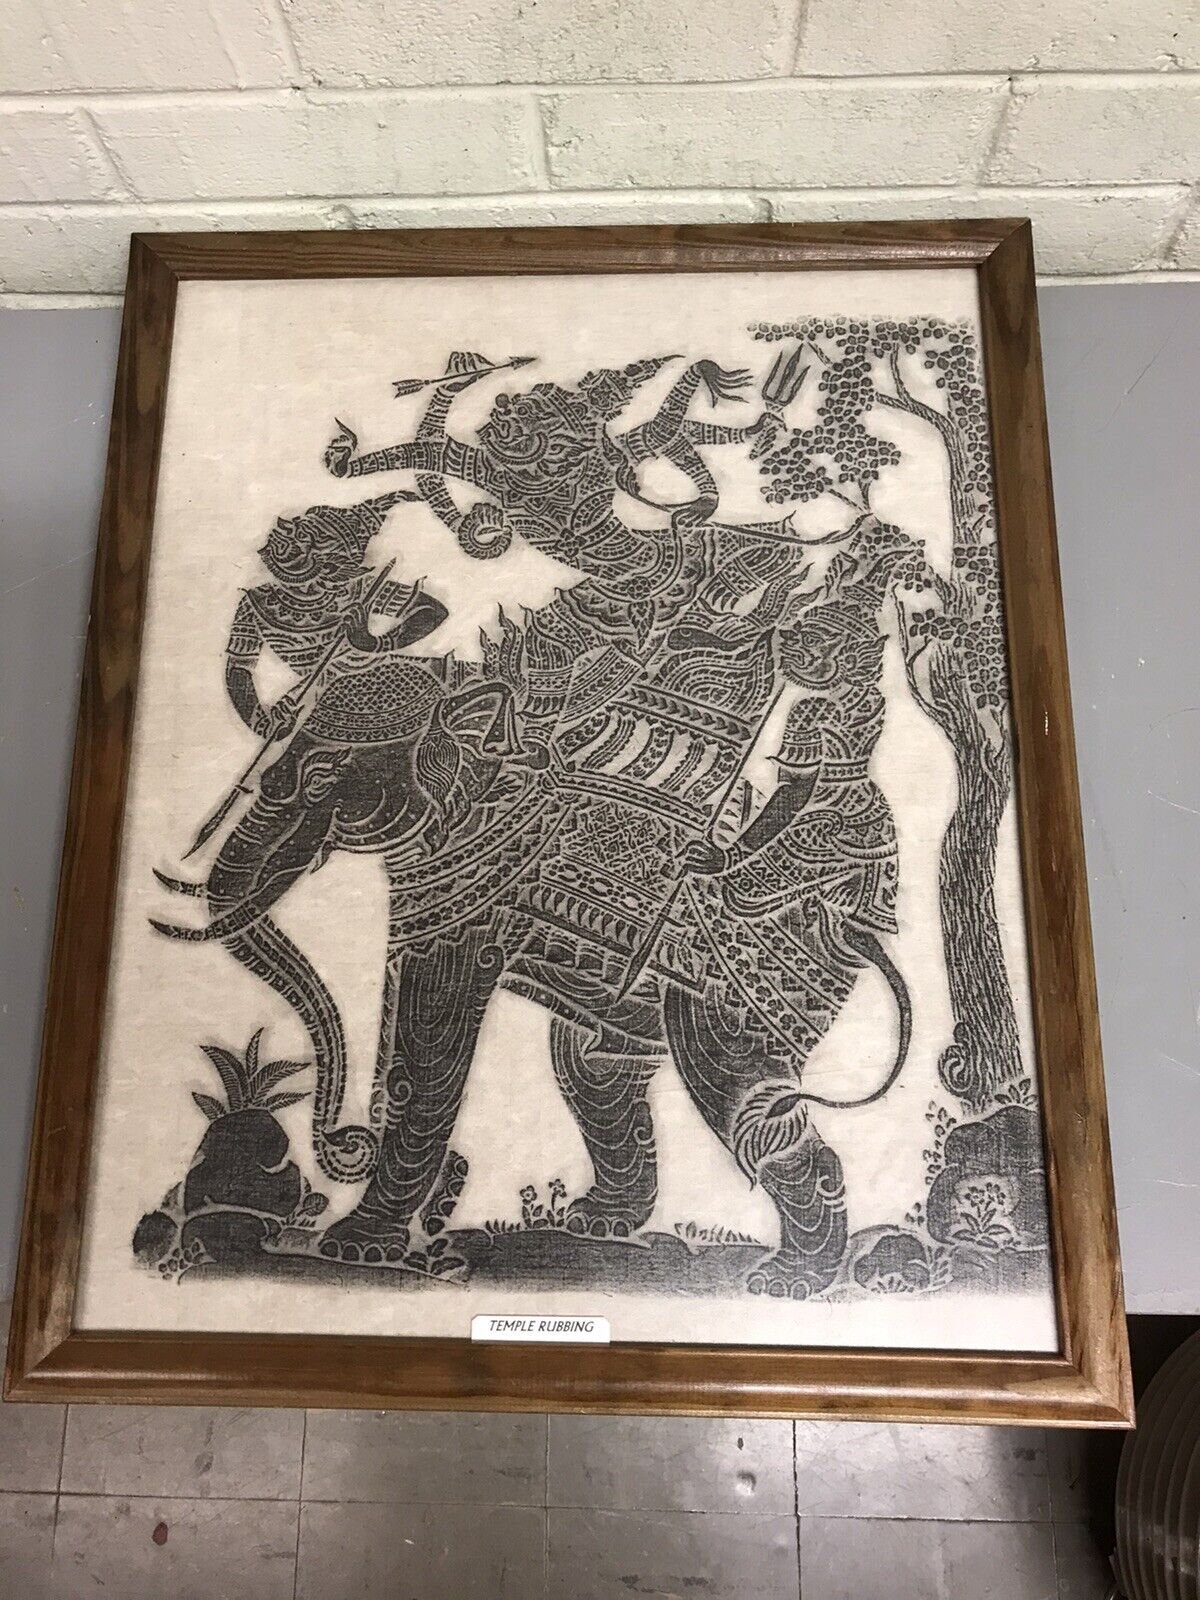 VINTAGE FRAMED TEMPLE RUBBING WITH ELEPHANT THAI? 21 1/2 X 17 1/2 X 5/8” 